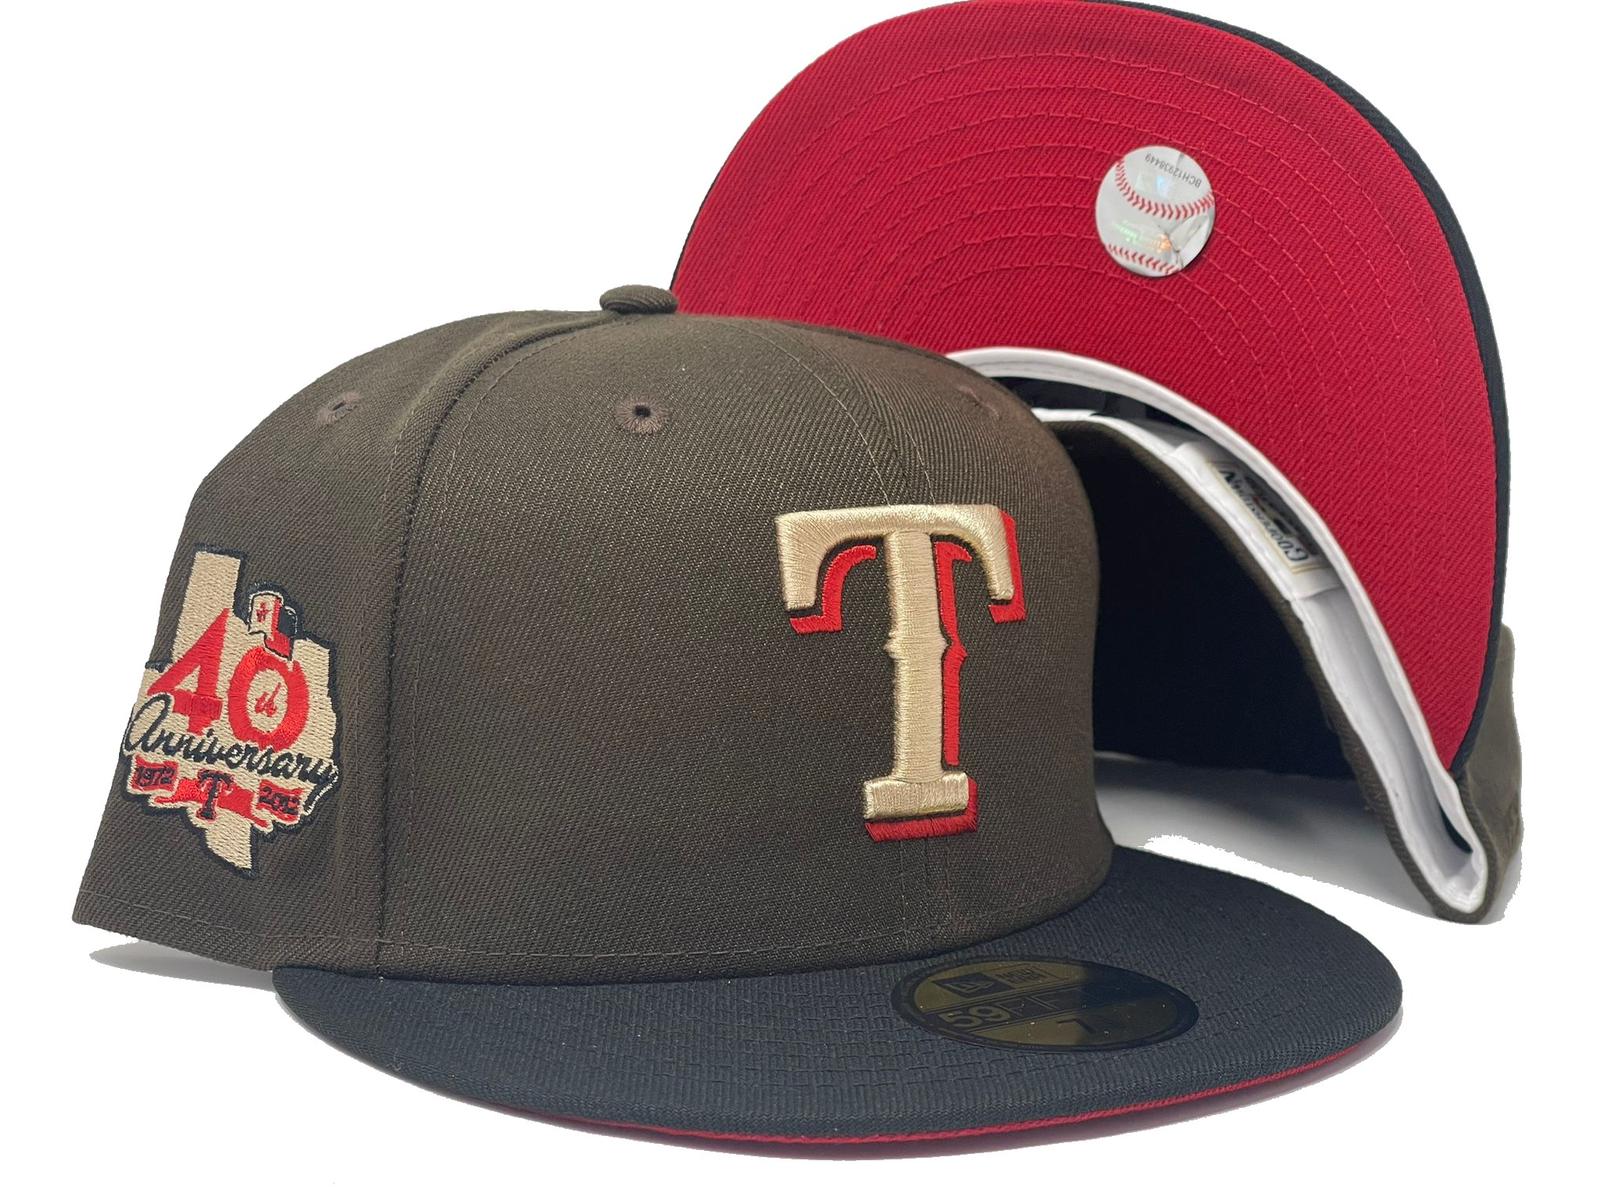 New Era / Men's Texas Rangers 39Thirty Classic Red Stretch Fit Hat